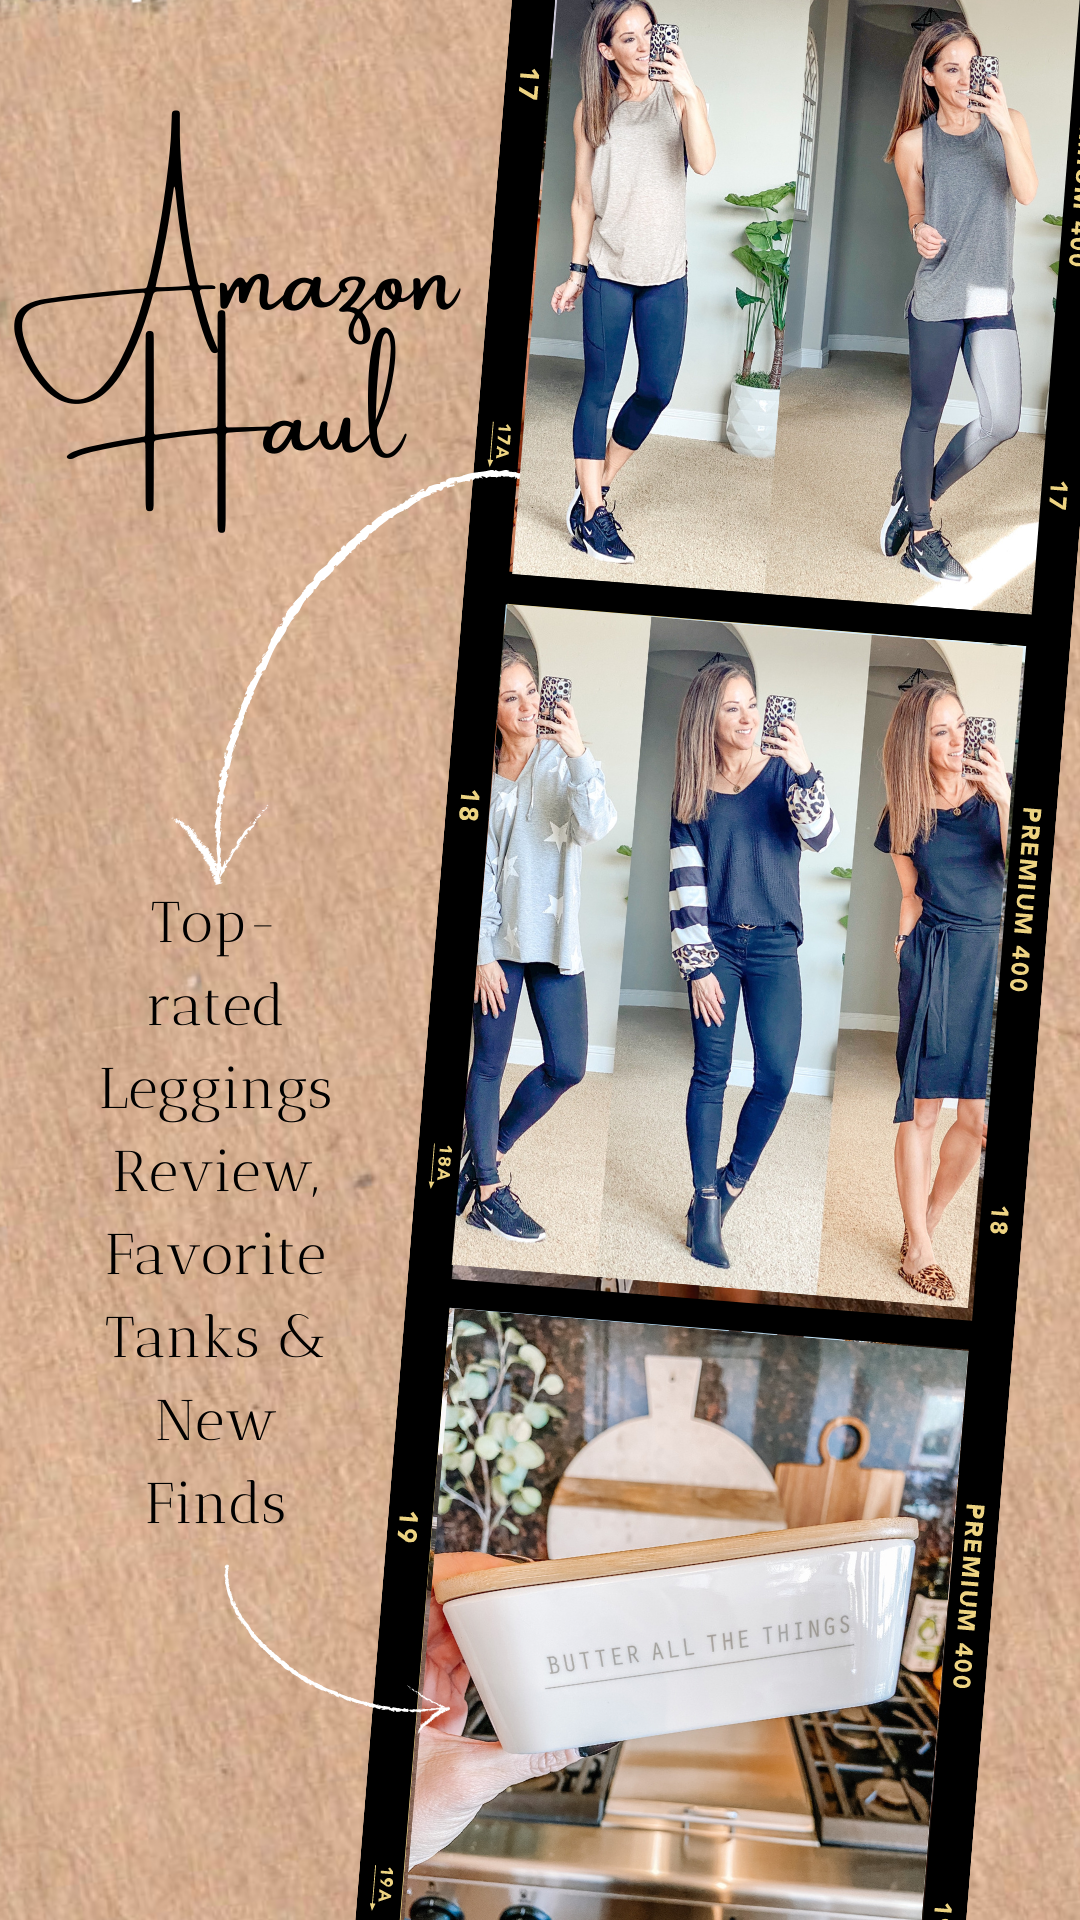 Haul! Top-rated Leggings Review, Favorite Tanks & New Finds -  Everyday Holly